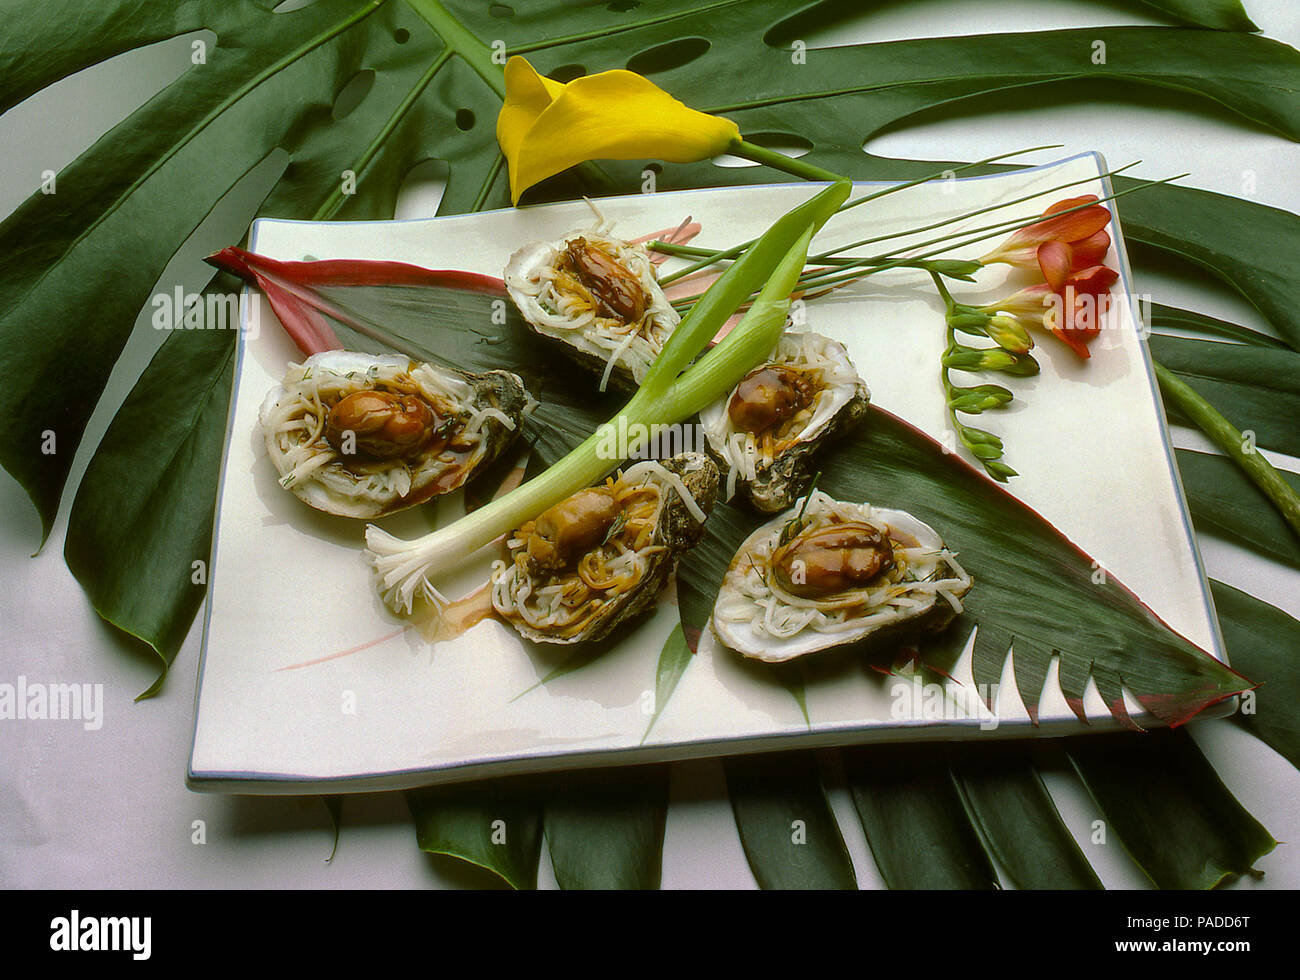 Oysters on half shell Stock Photo